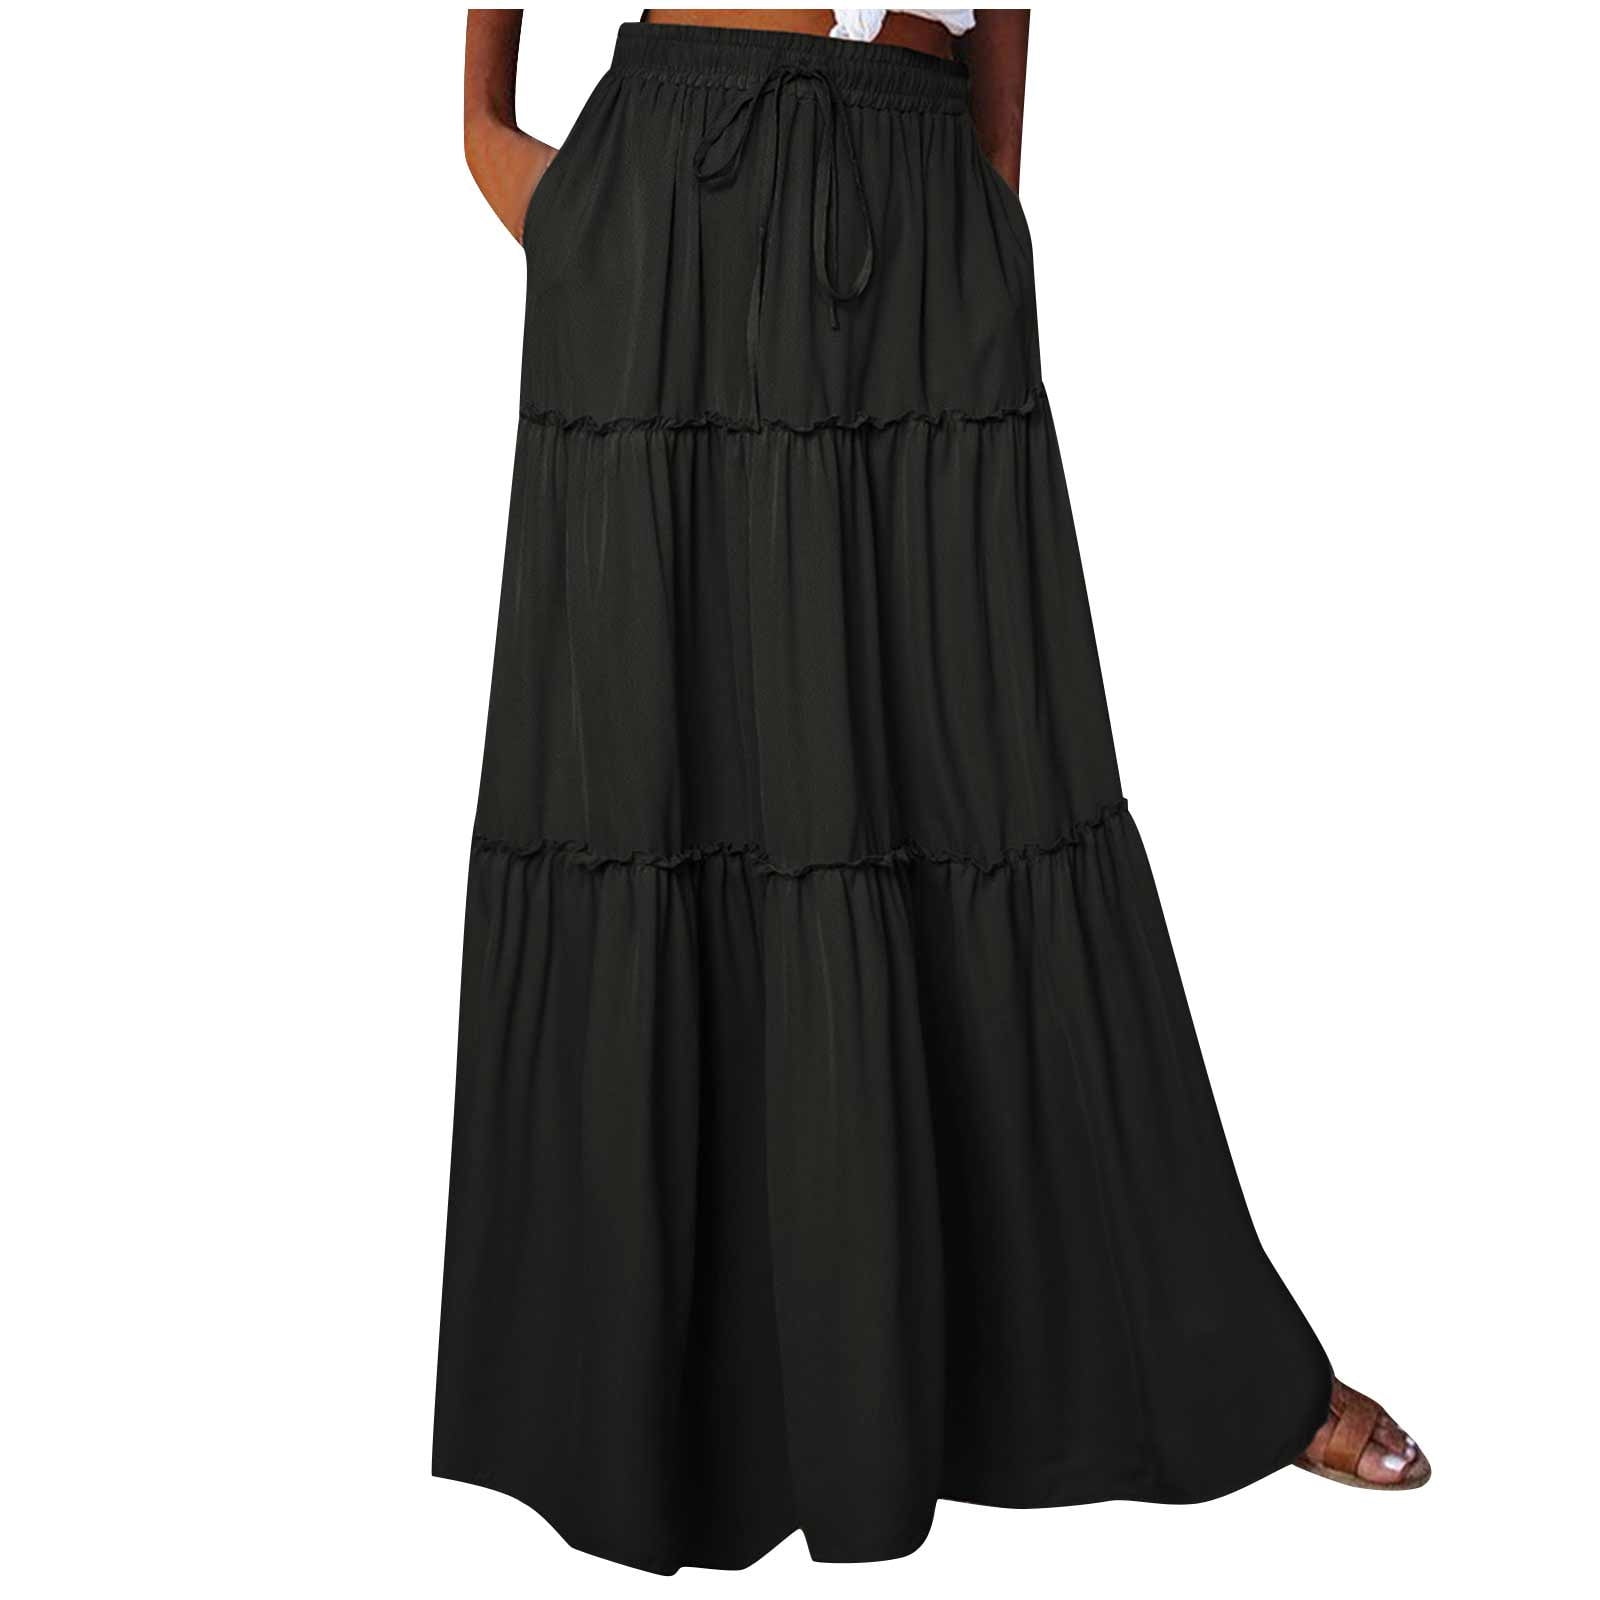 Umfun Women Maxi Skirts Solid Pleated A Line Skirt Casual Comfort ...